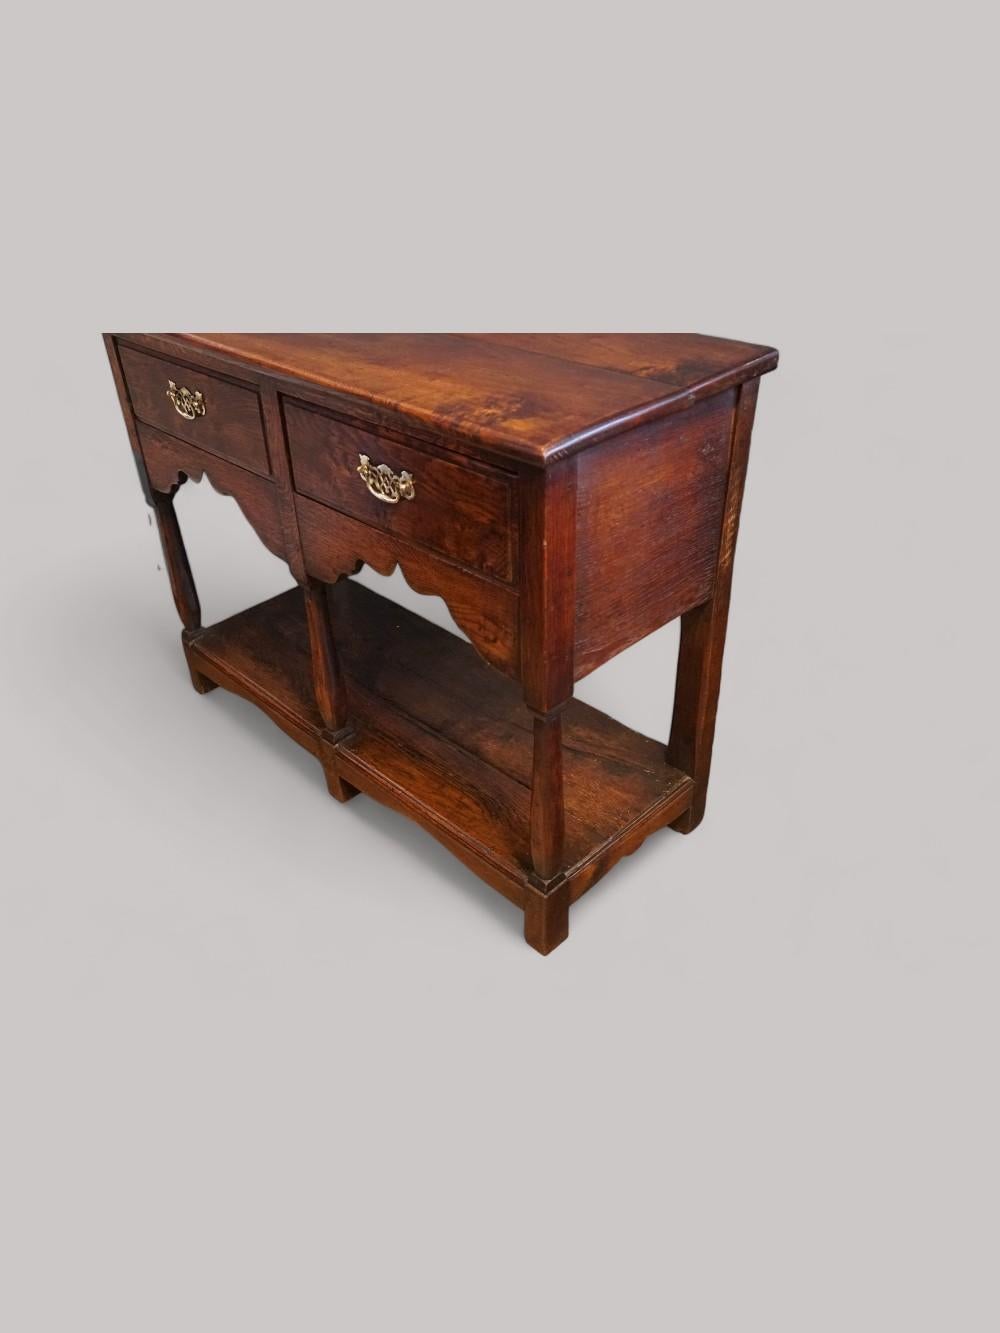 Antique oak cottage dresser base
Here we are pleased to offer you this Antique oak cottage dresser base that was made circa 1850.
It is of a great small size and so can fit into most places around your home.
It is fitted 2 drawers with brass fret